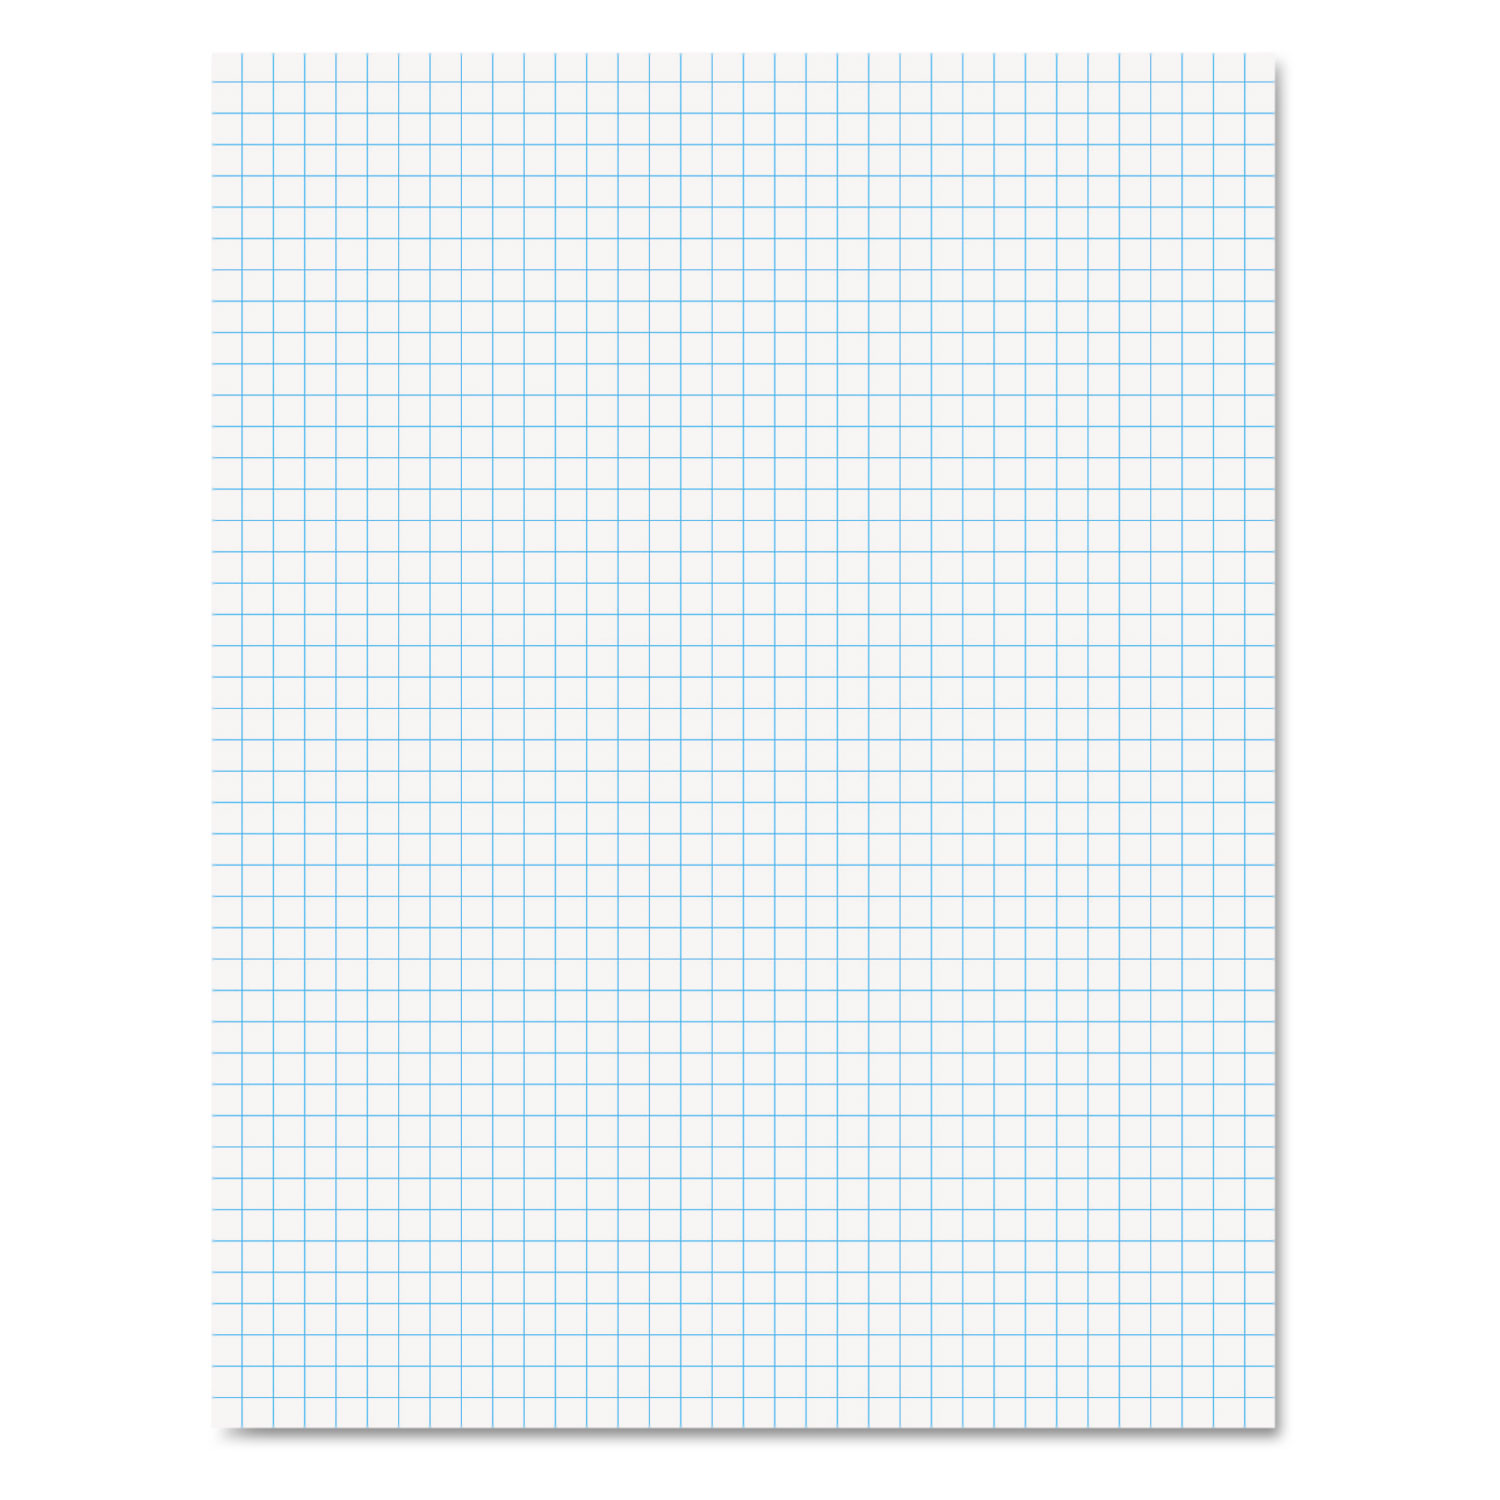  Ampad 22-000 Quadrille Pads, 4 sq/in Quadrille Rule, 8.5 x 11, White, 50 Sheets (TOP22000) 